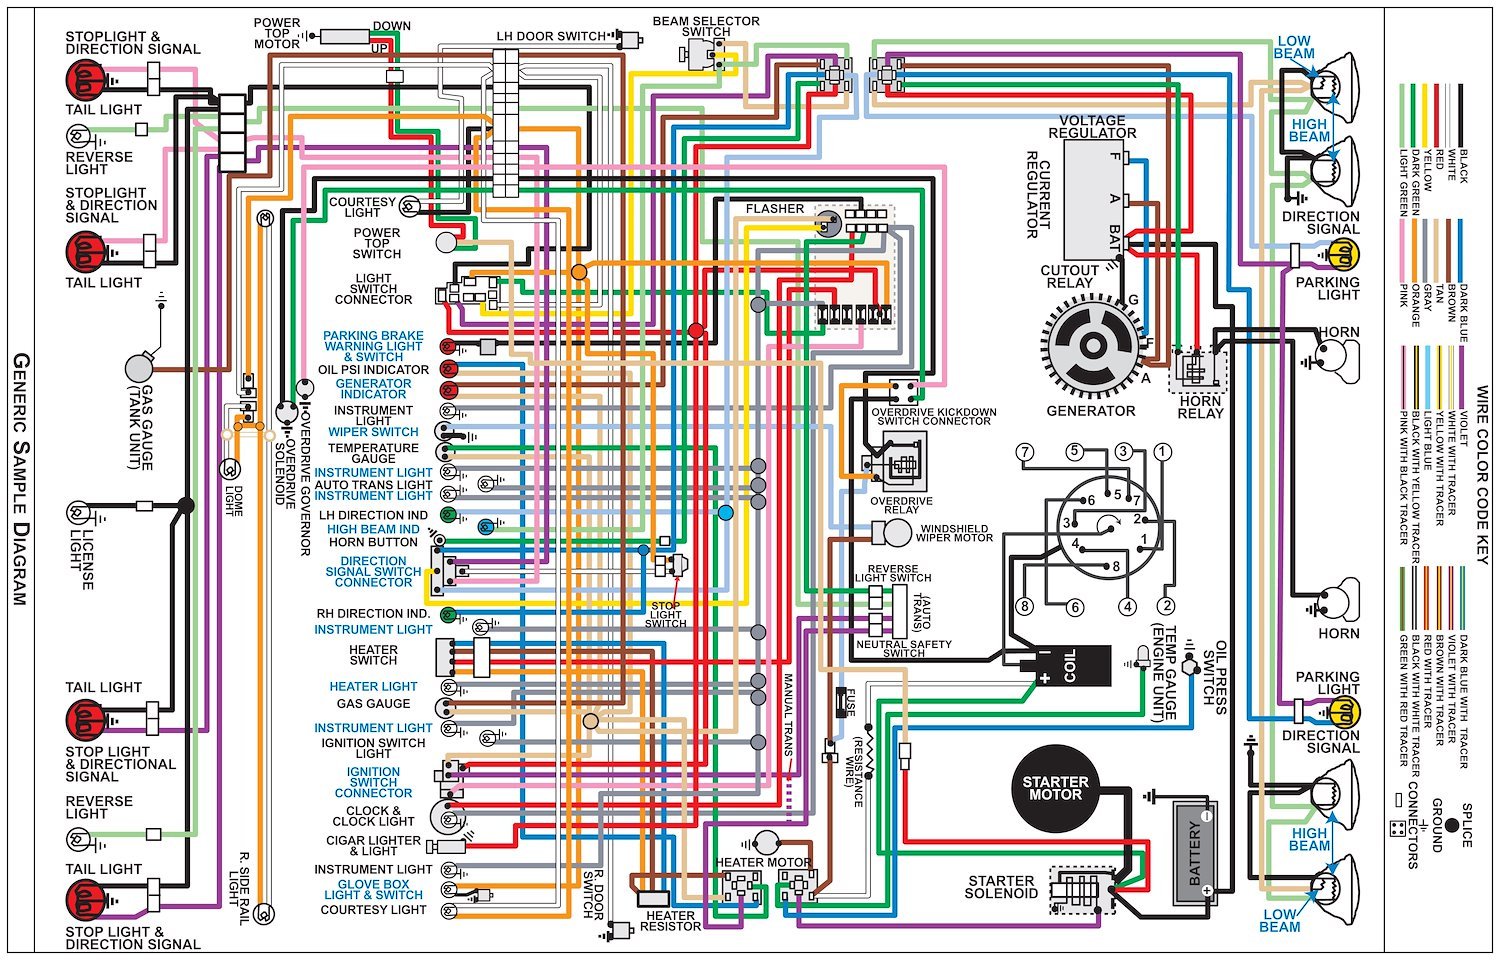 Wiring Diagram for 1967 Cadillac, 11 in. x 17 in., Laminated